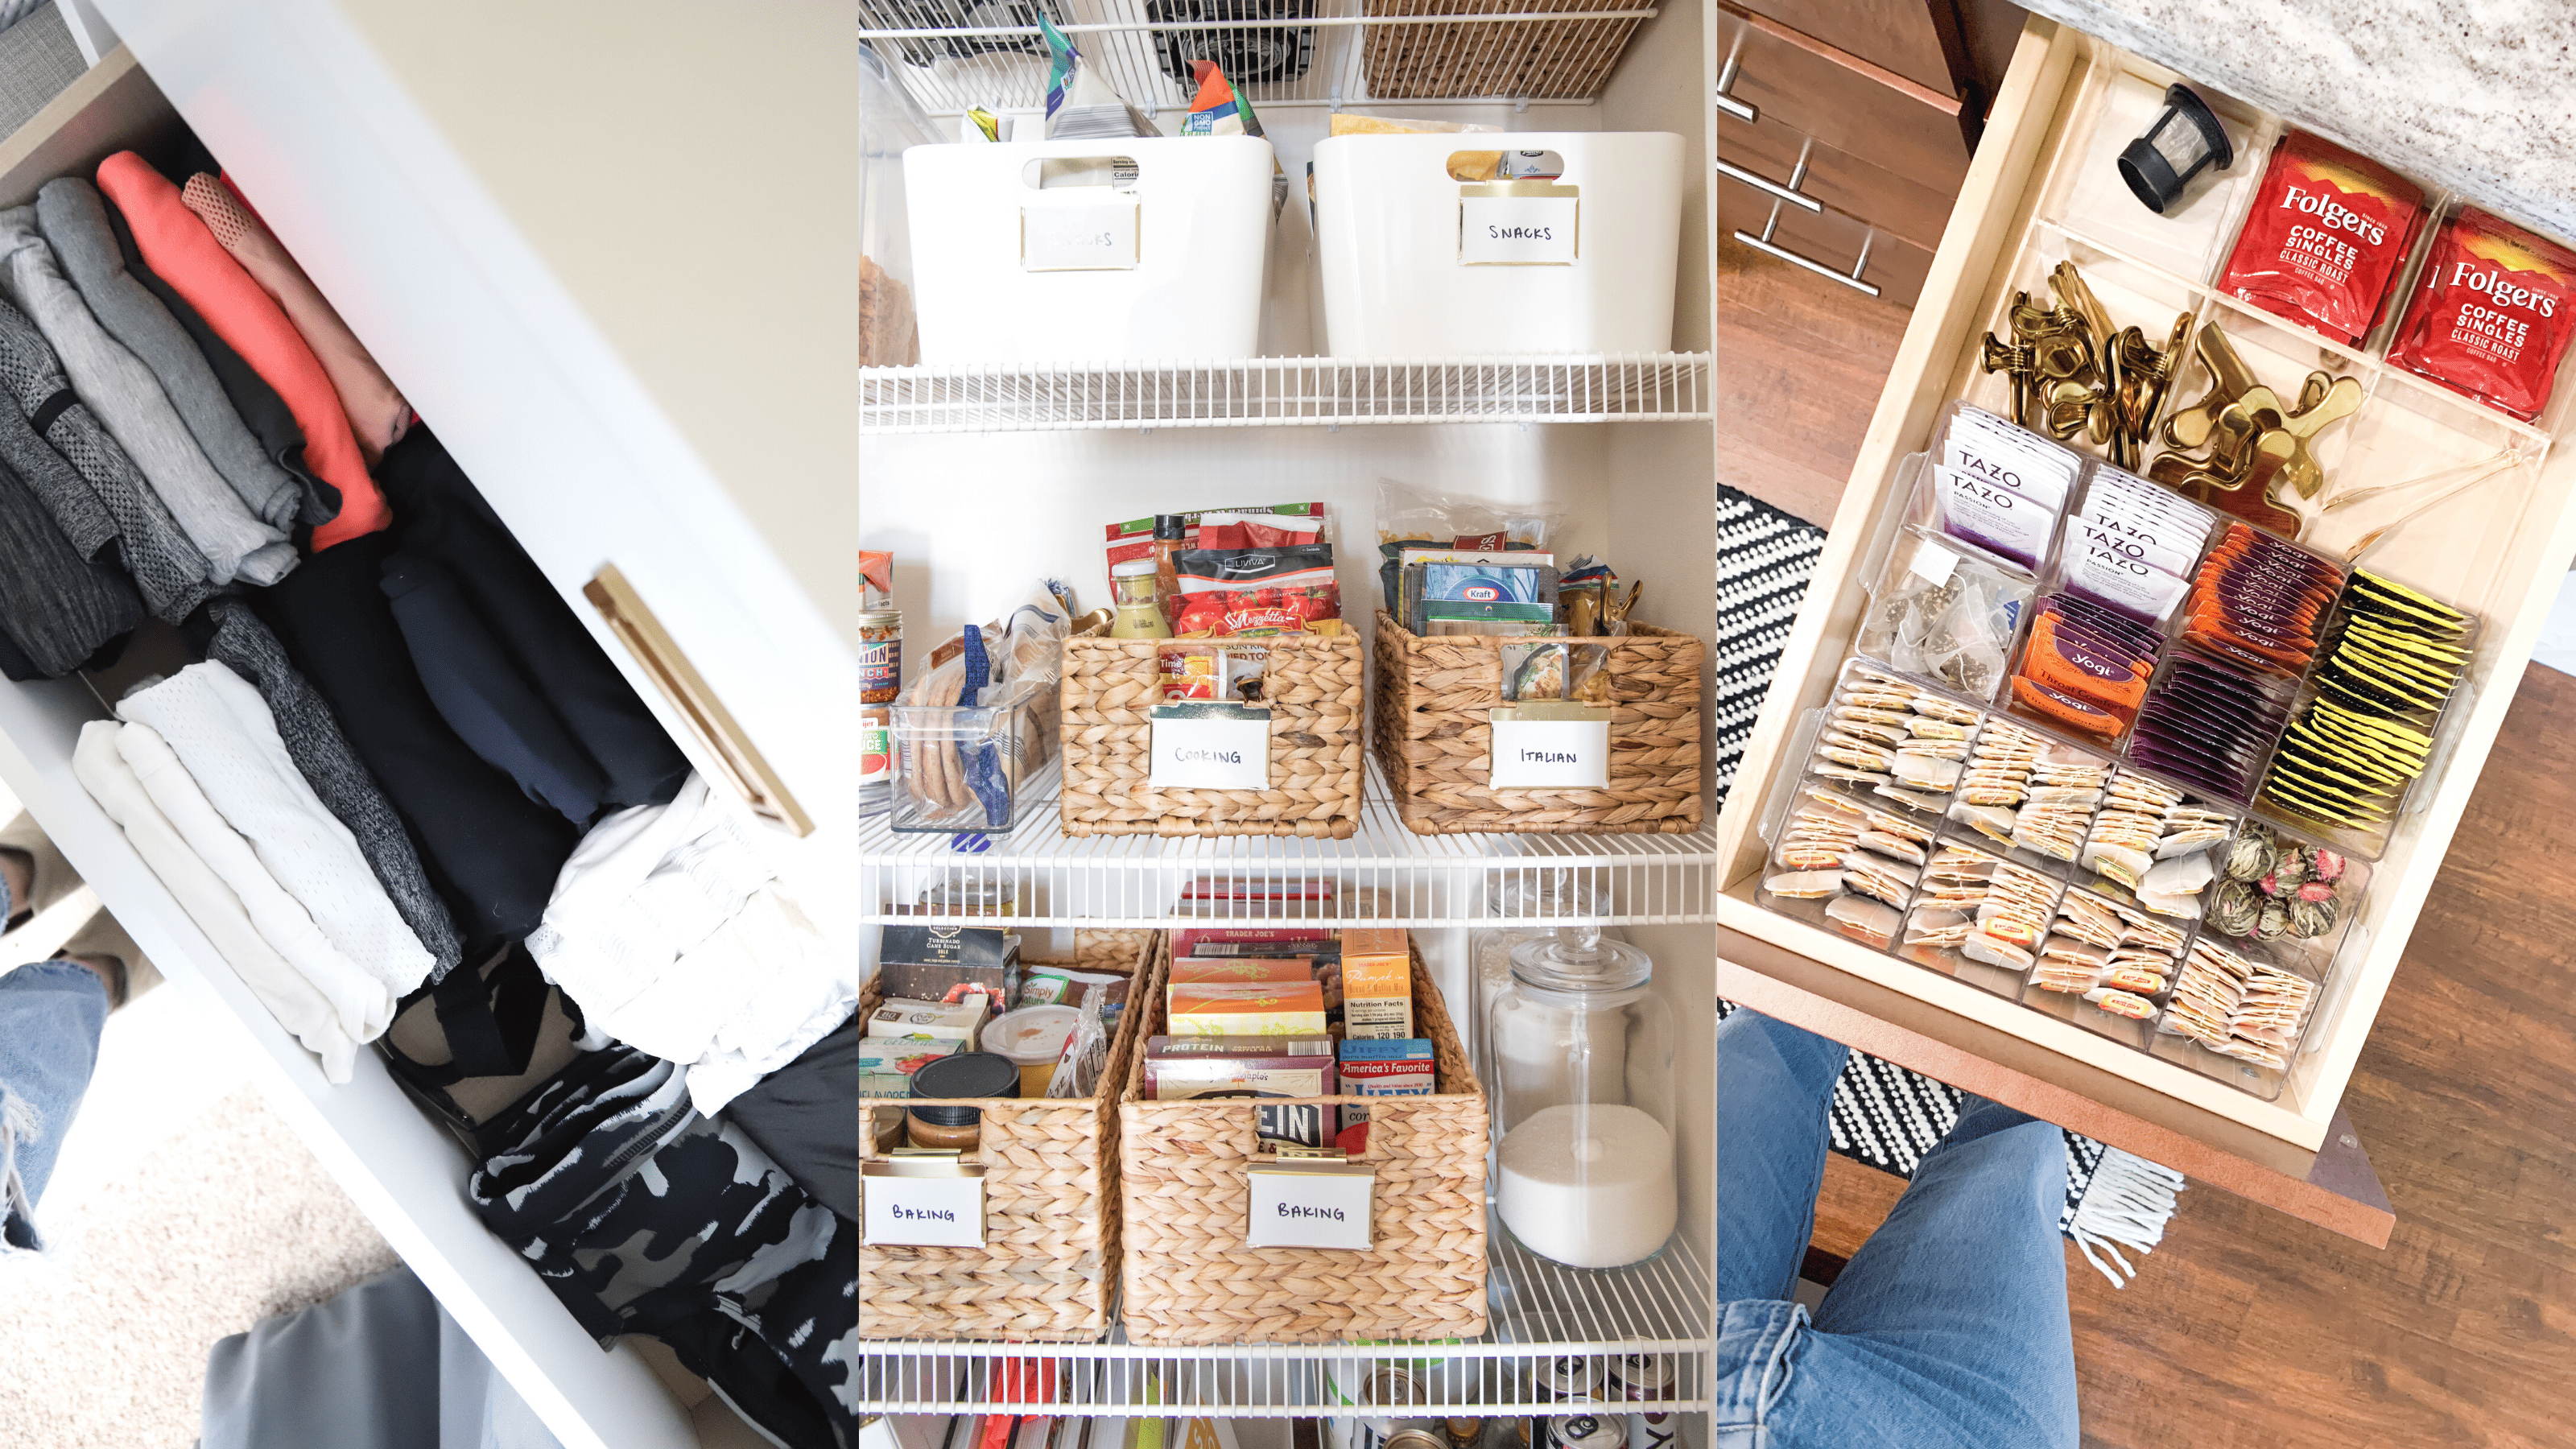 Get Your Home Insanely Tidy With These 18 Storage Organization ...